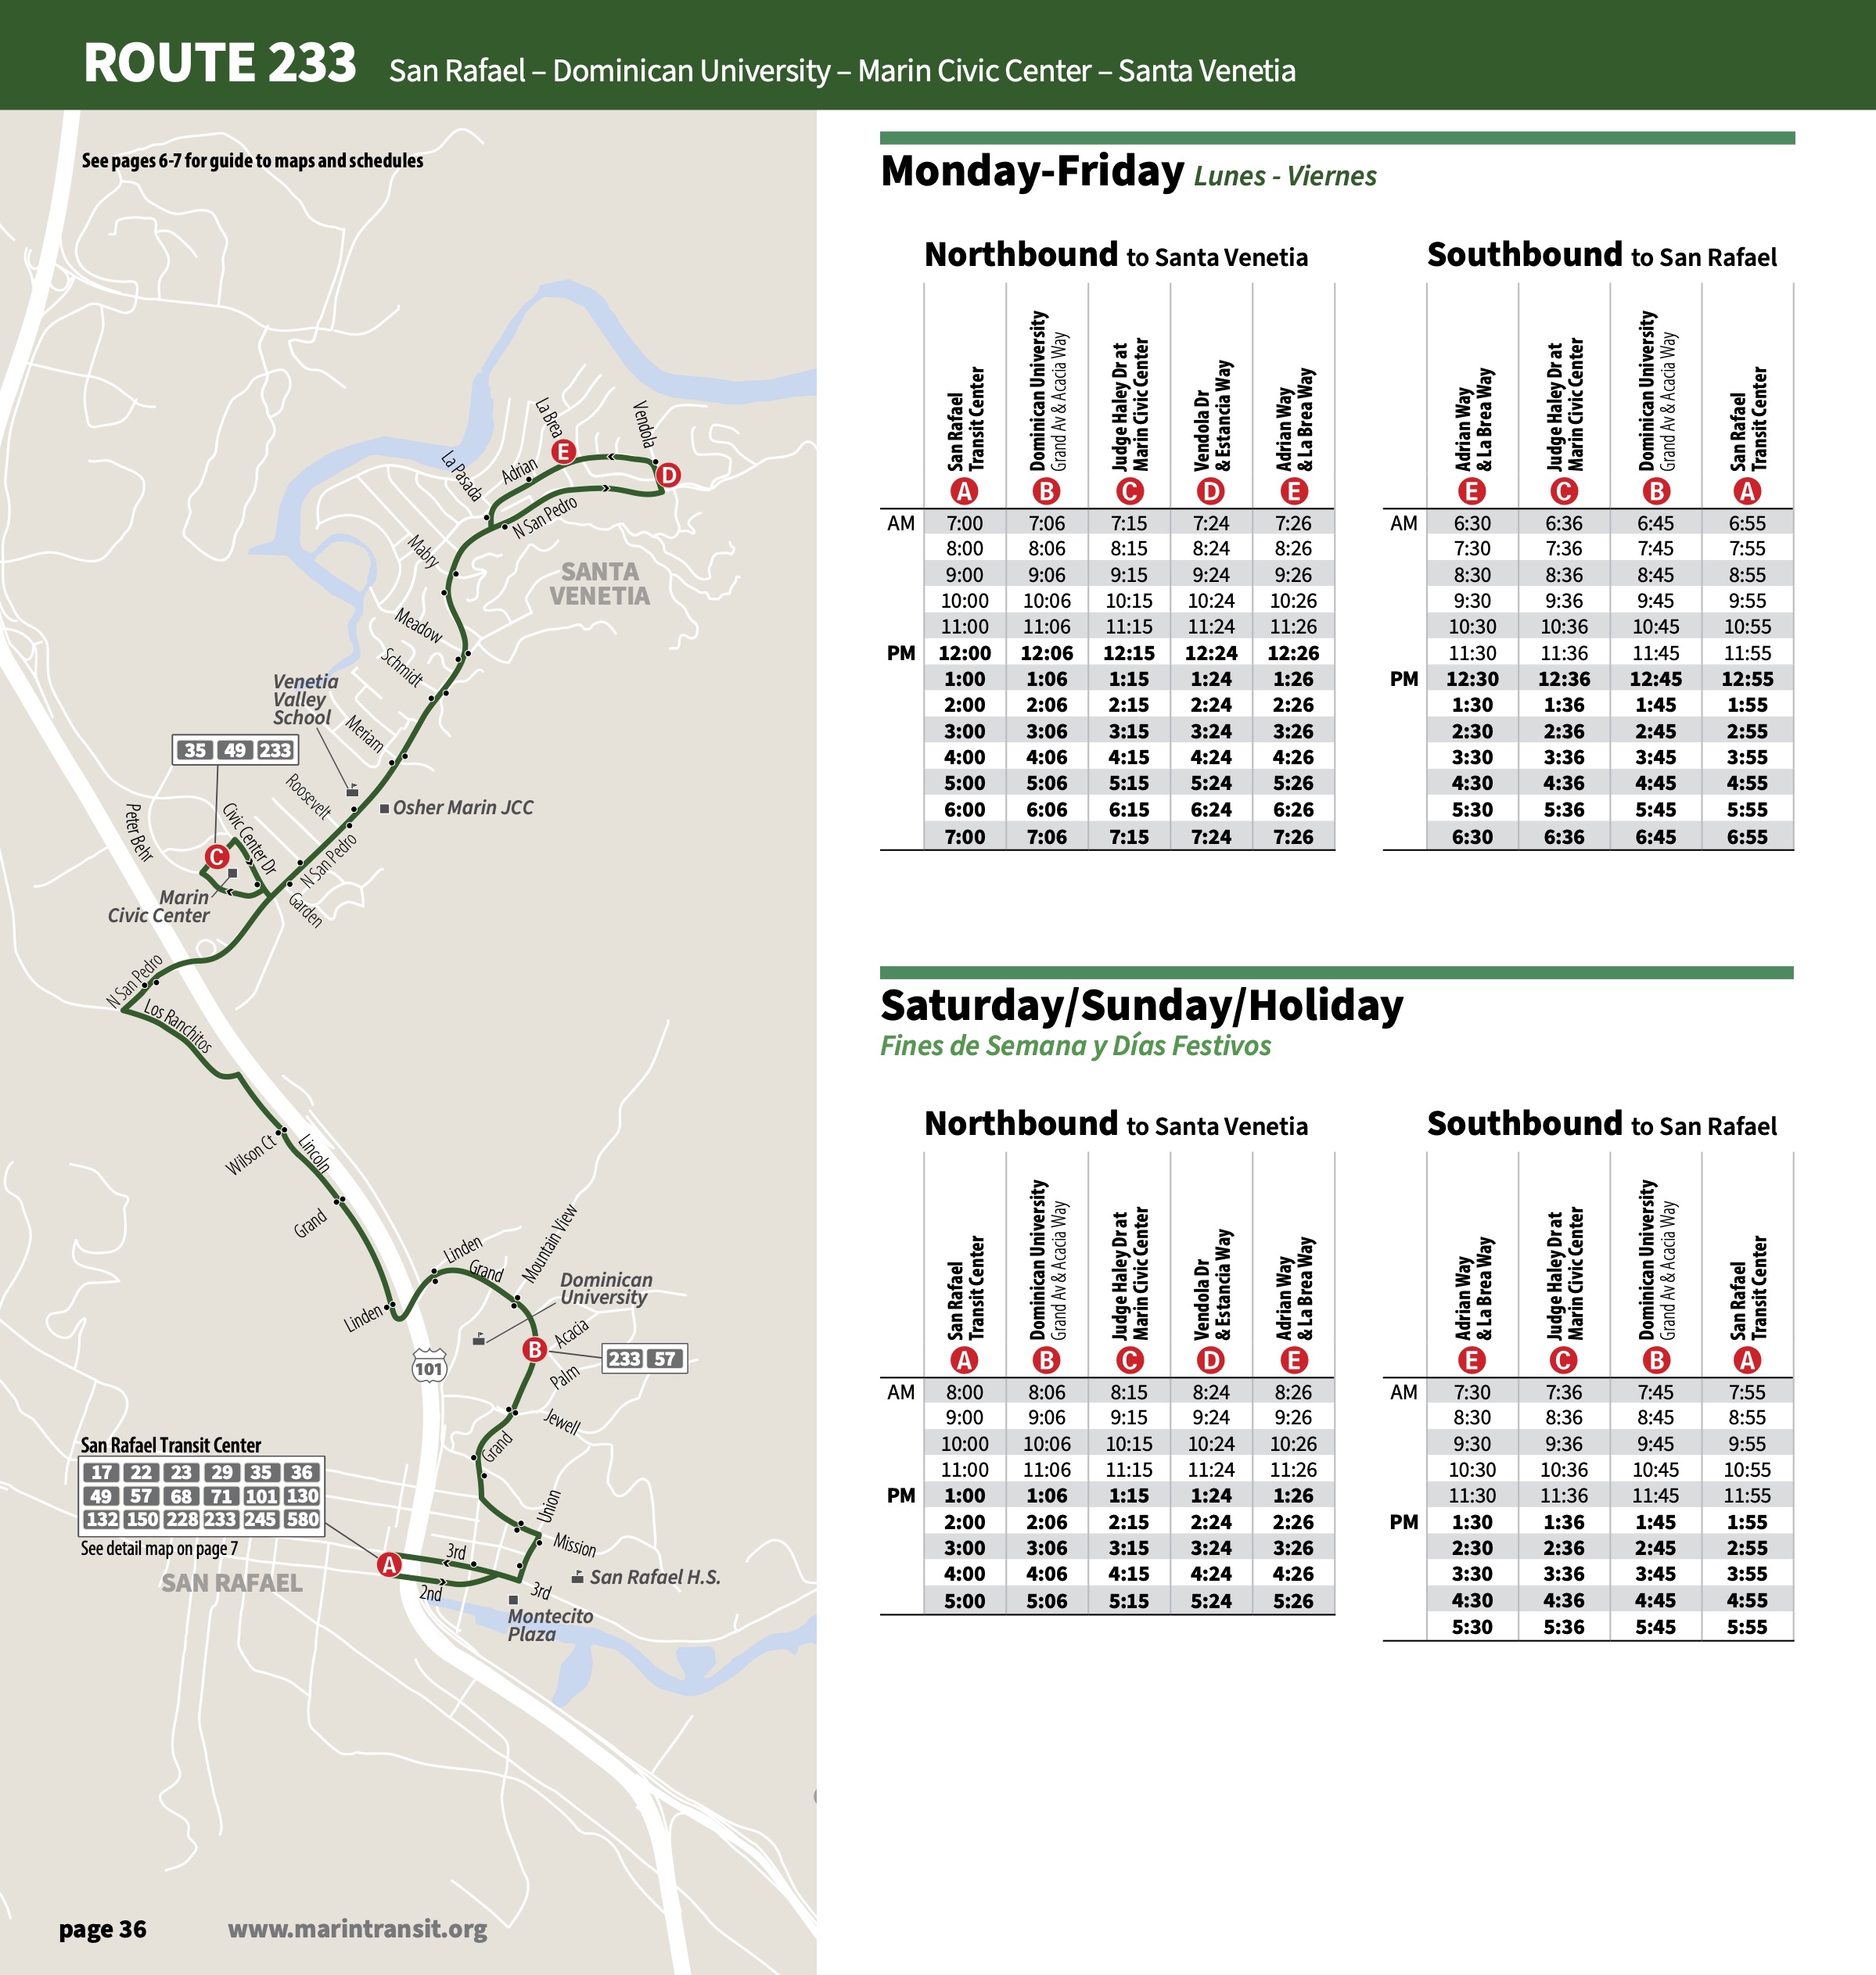 Route 233 New Map and Schedule